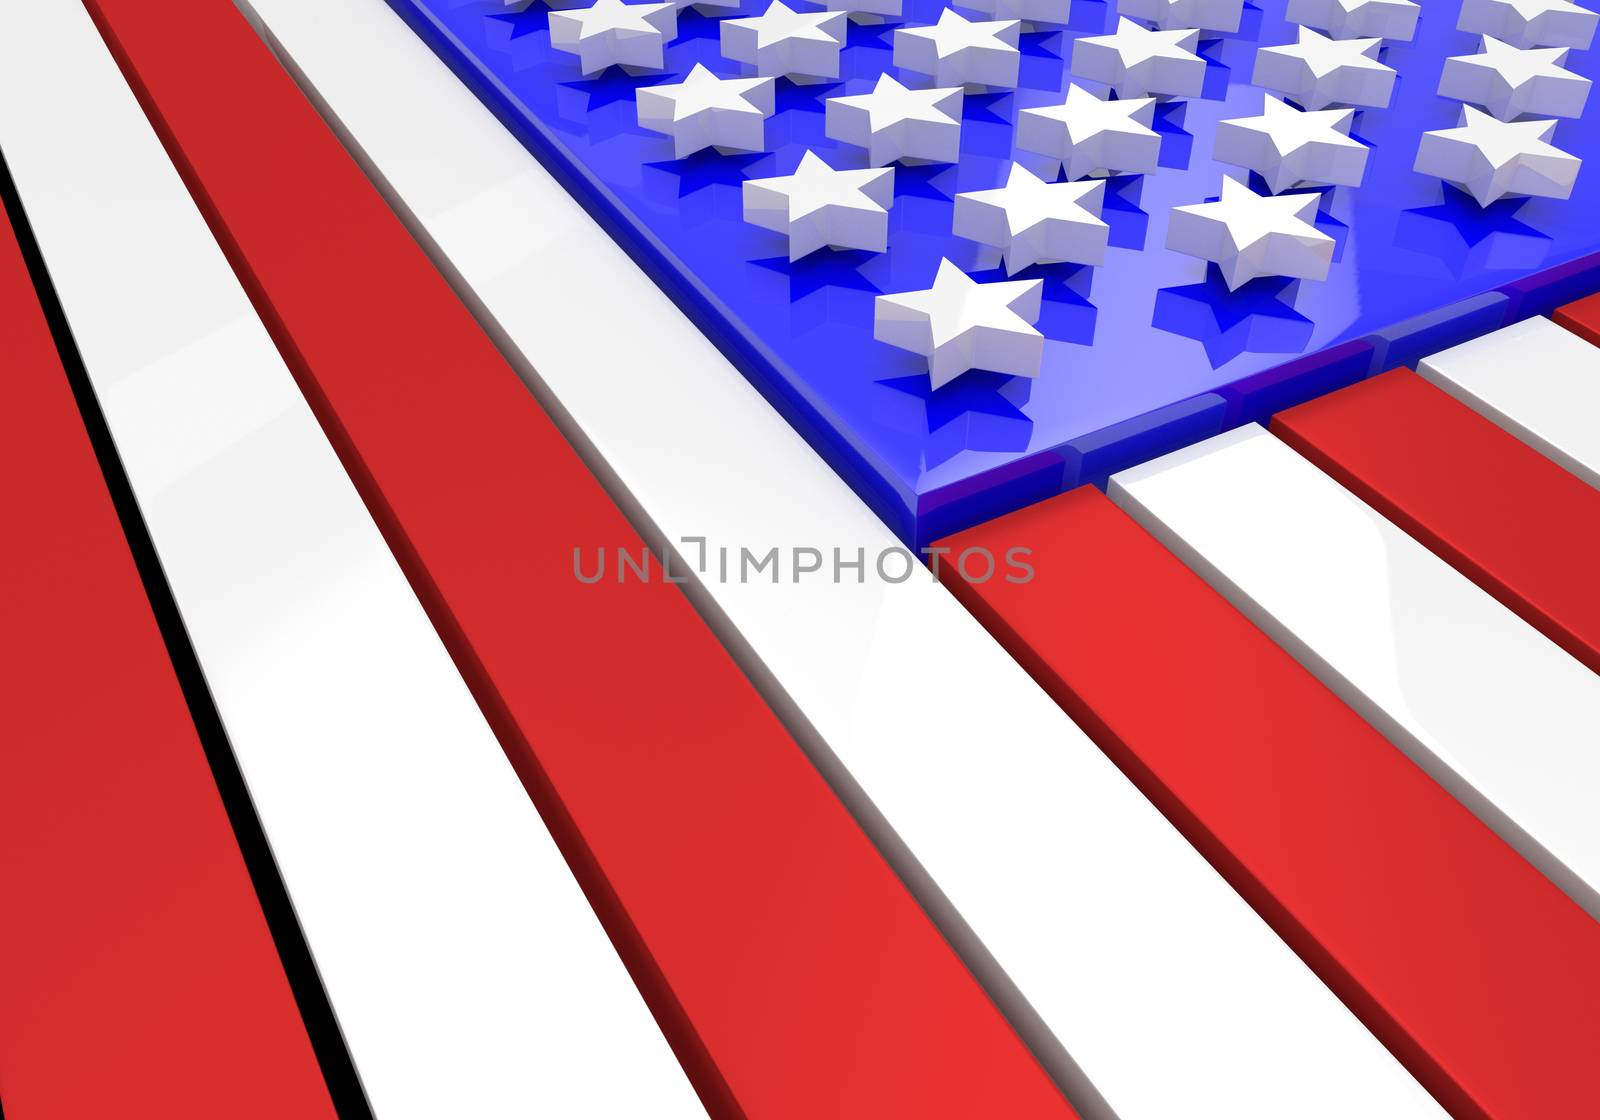 3D model of an American flag in relief by Balefire9